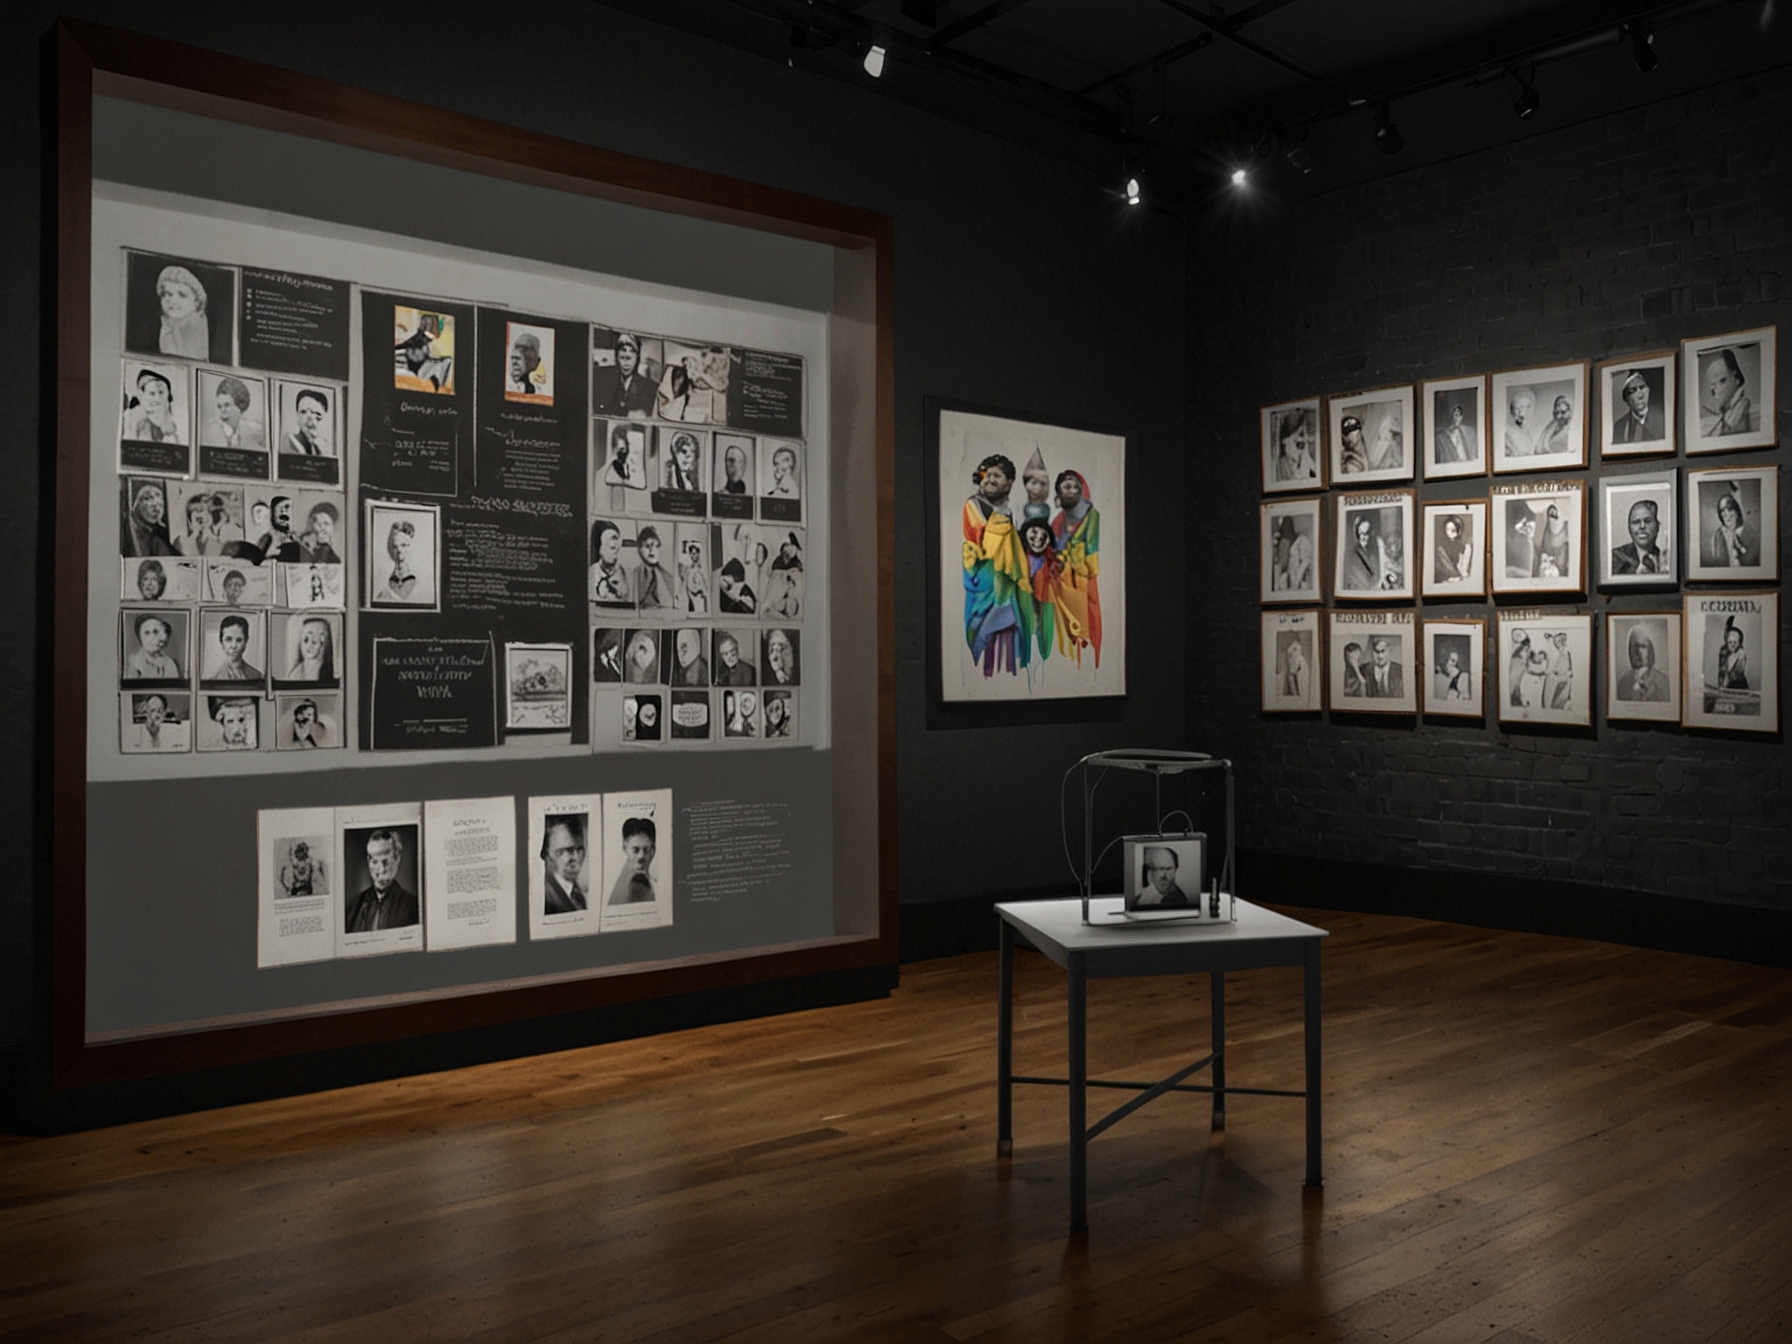 An interactive exhibit at the Stonewall National Monument features digital archives and augmented reality, providing an immersive education on the history and legacy of the LGBTQ+ movement.